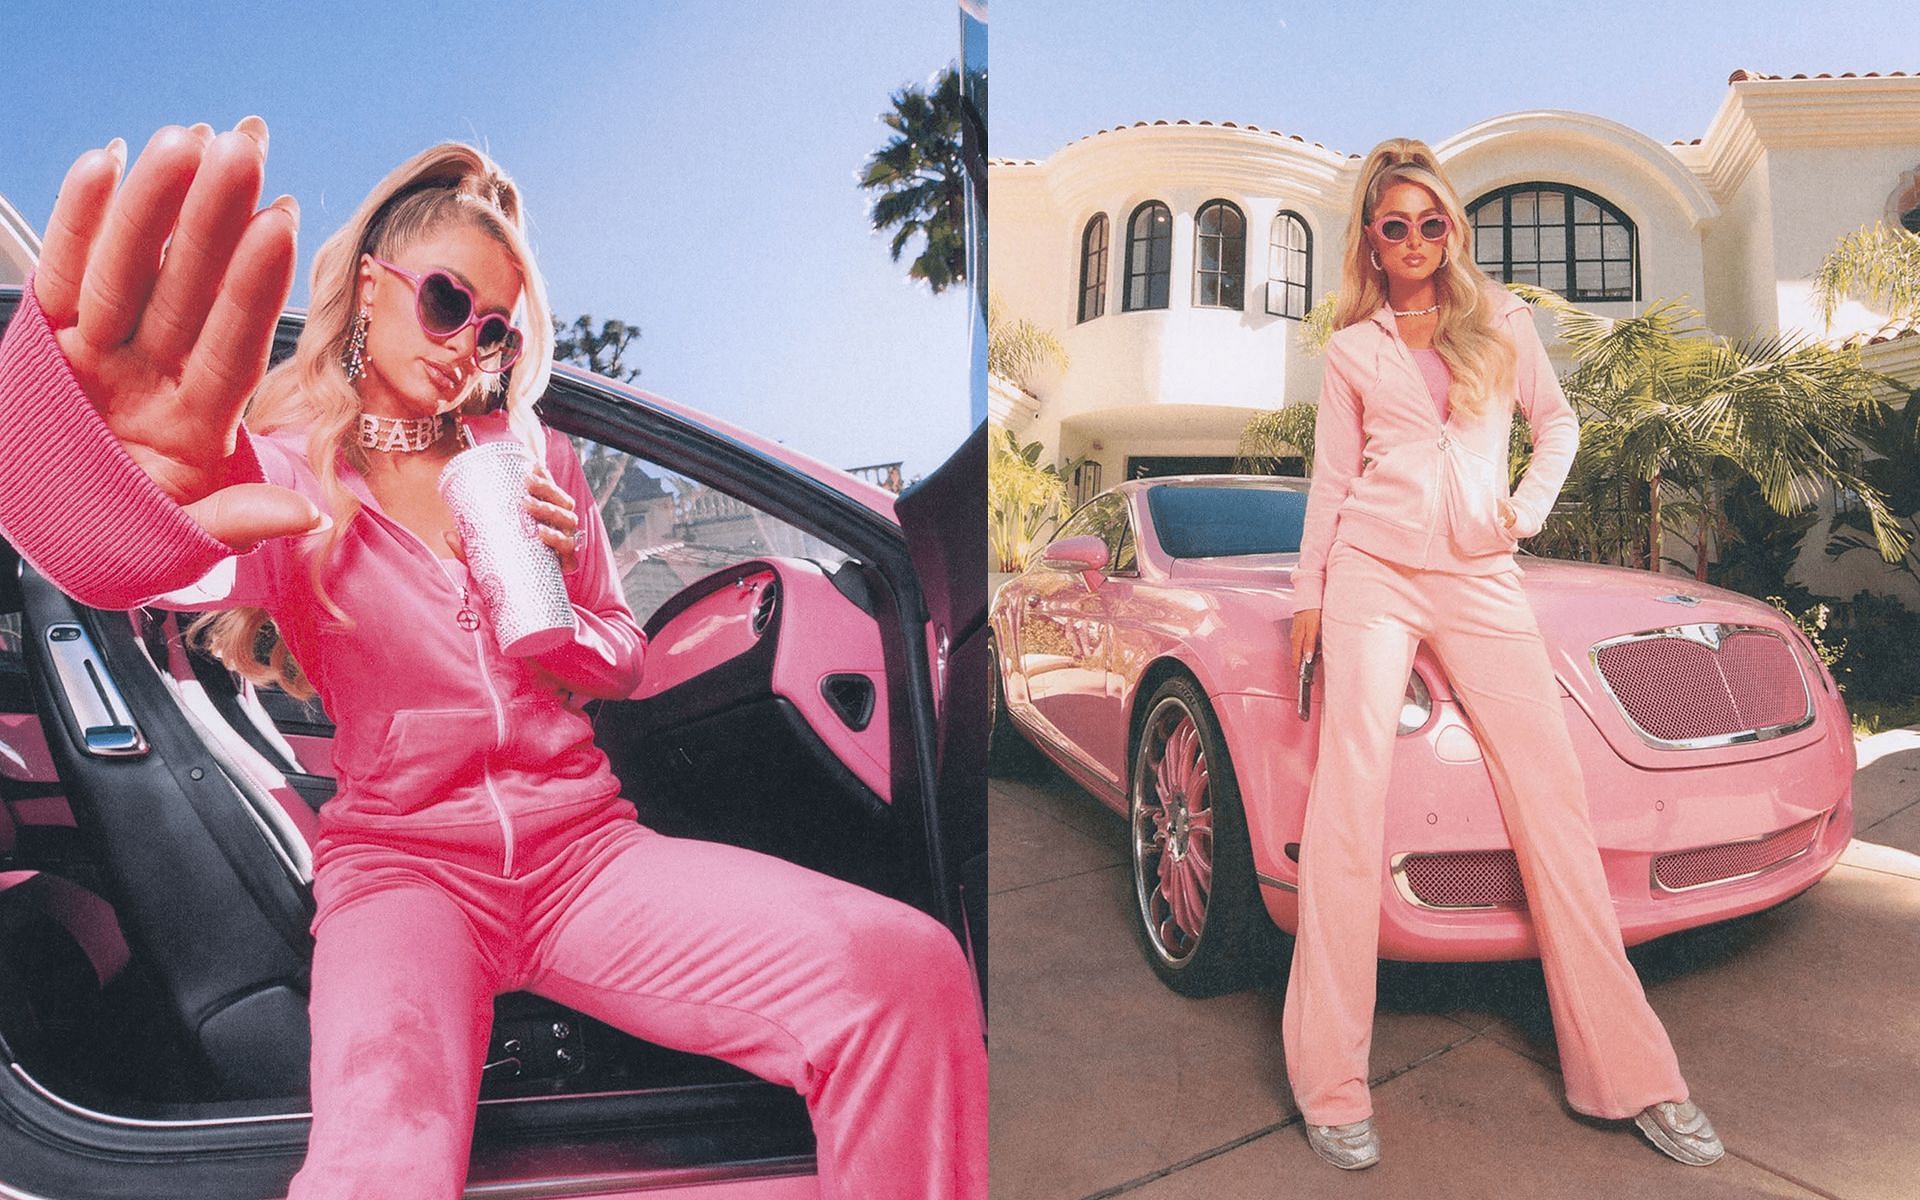 Paris Hilton launches her new Iconic Tracksuit collection with a